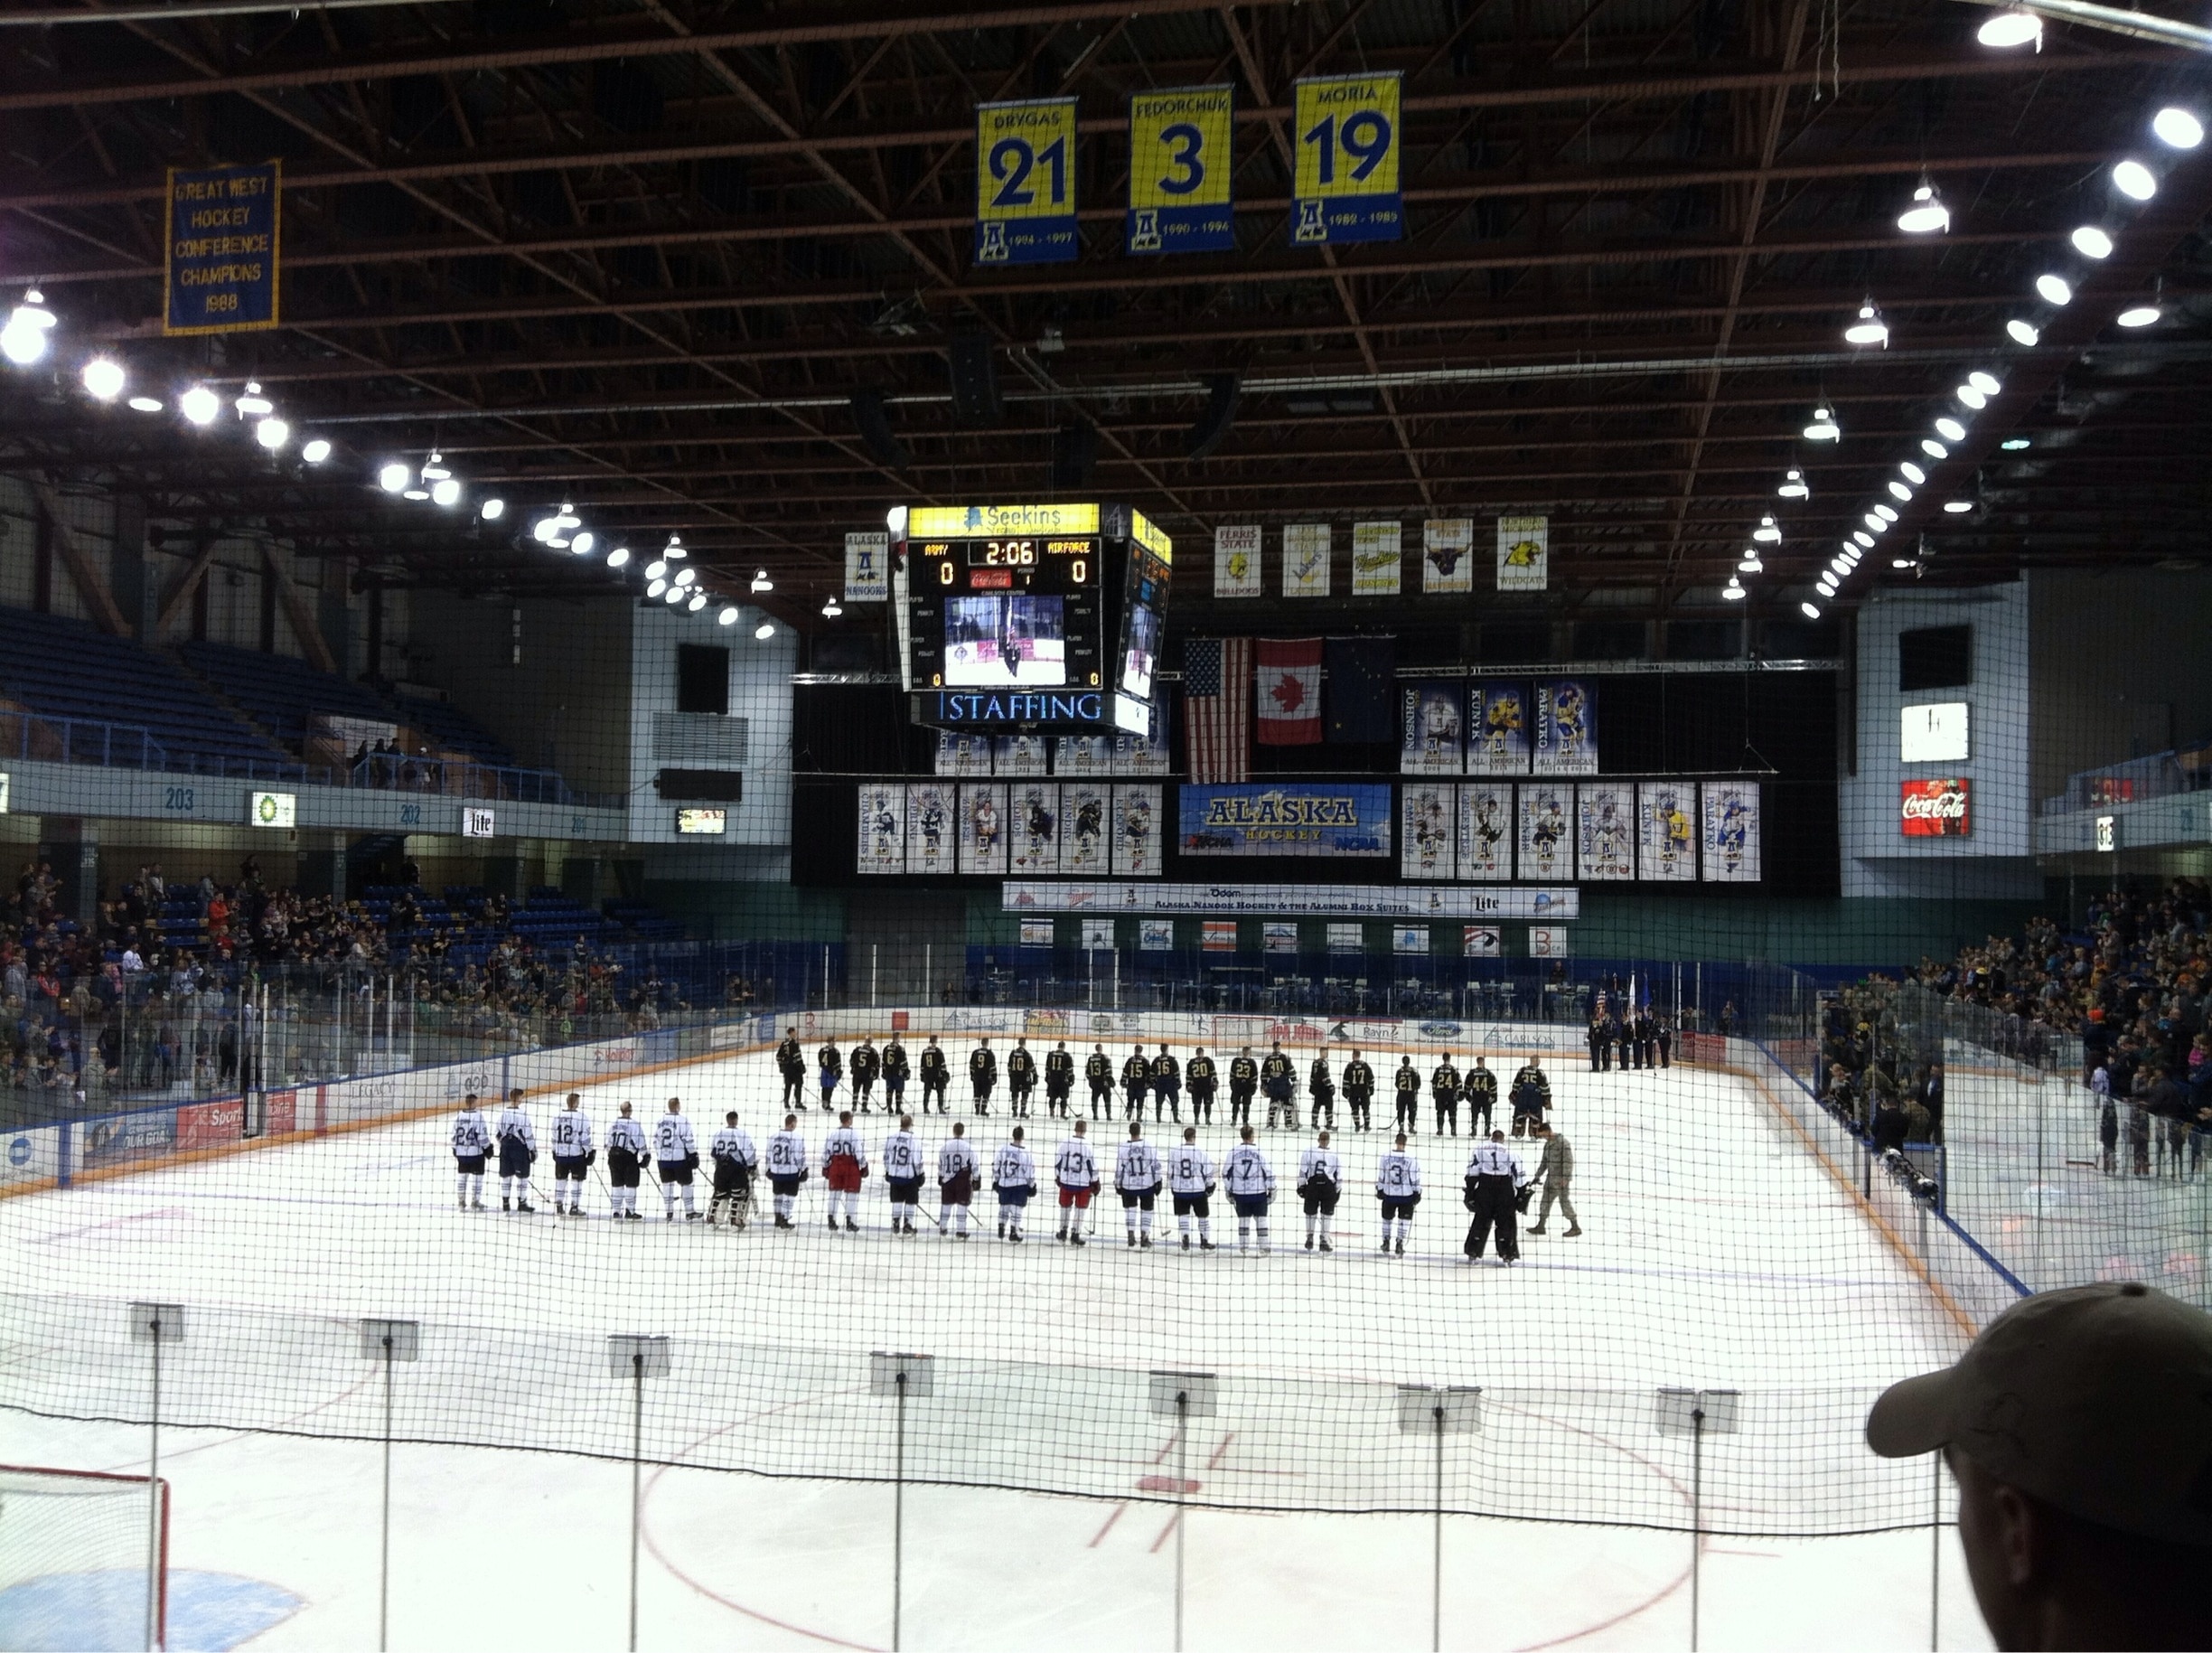 I went to the hockey game it was army agents air-force and army won 6 to 0 